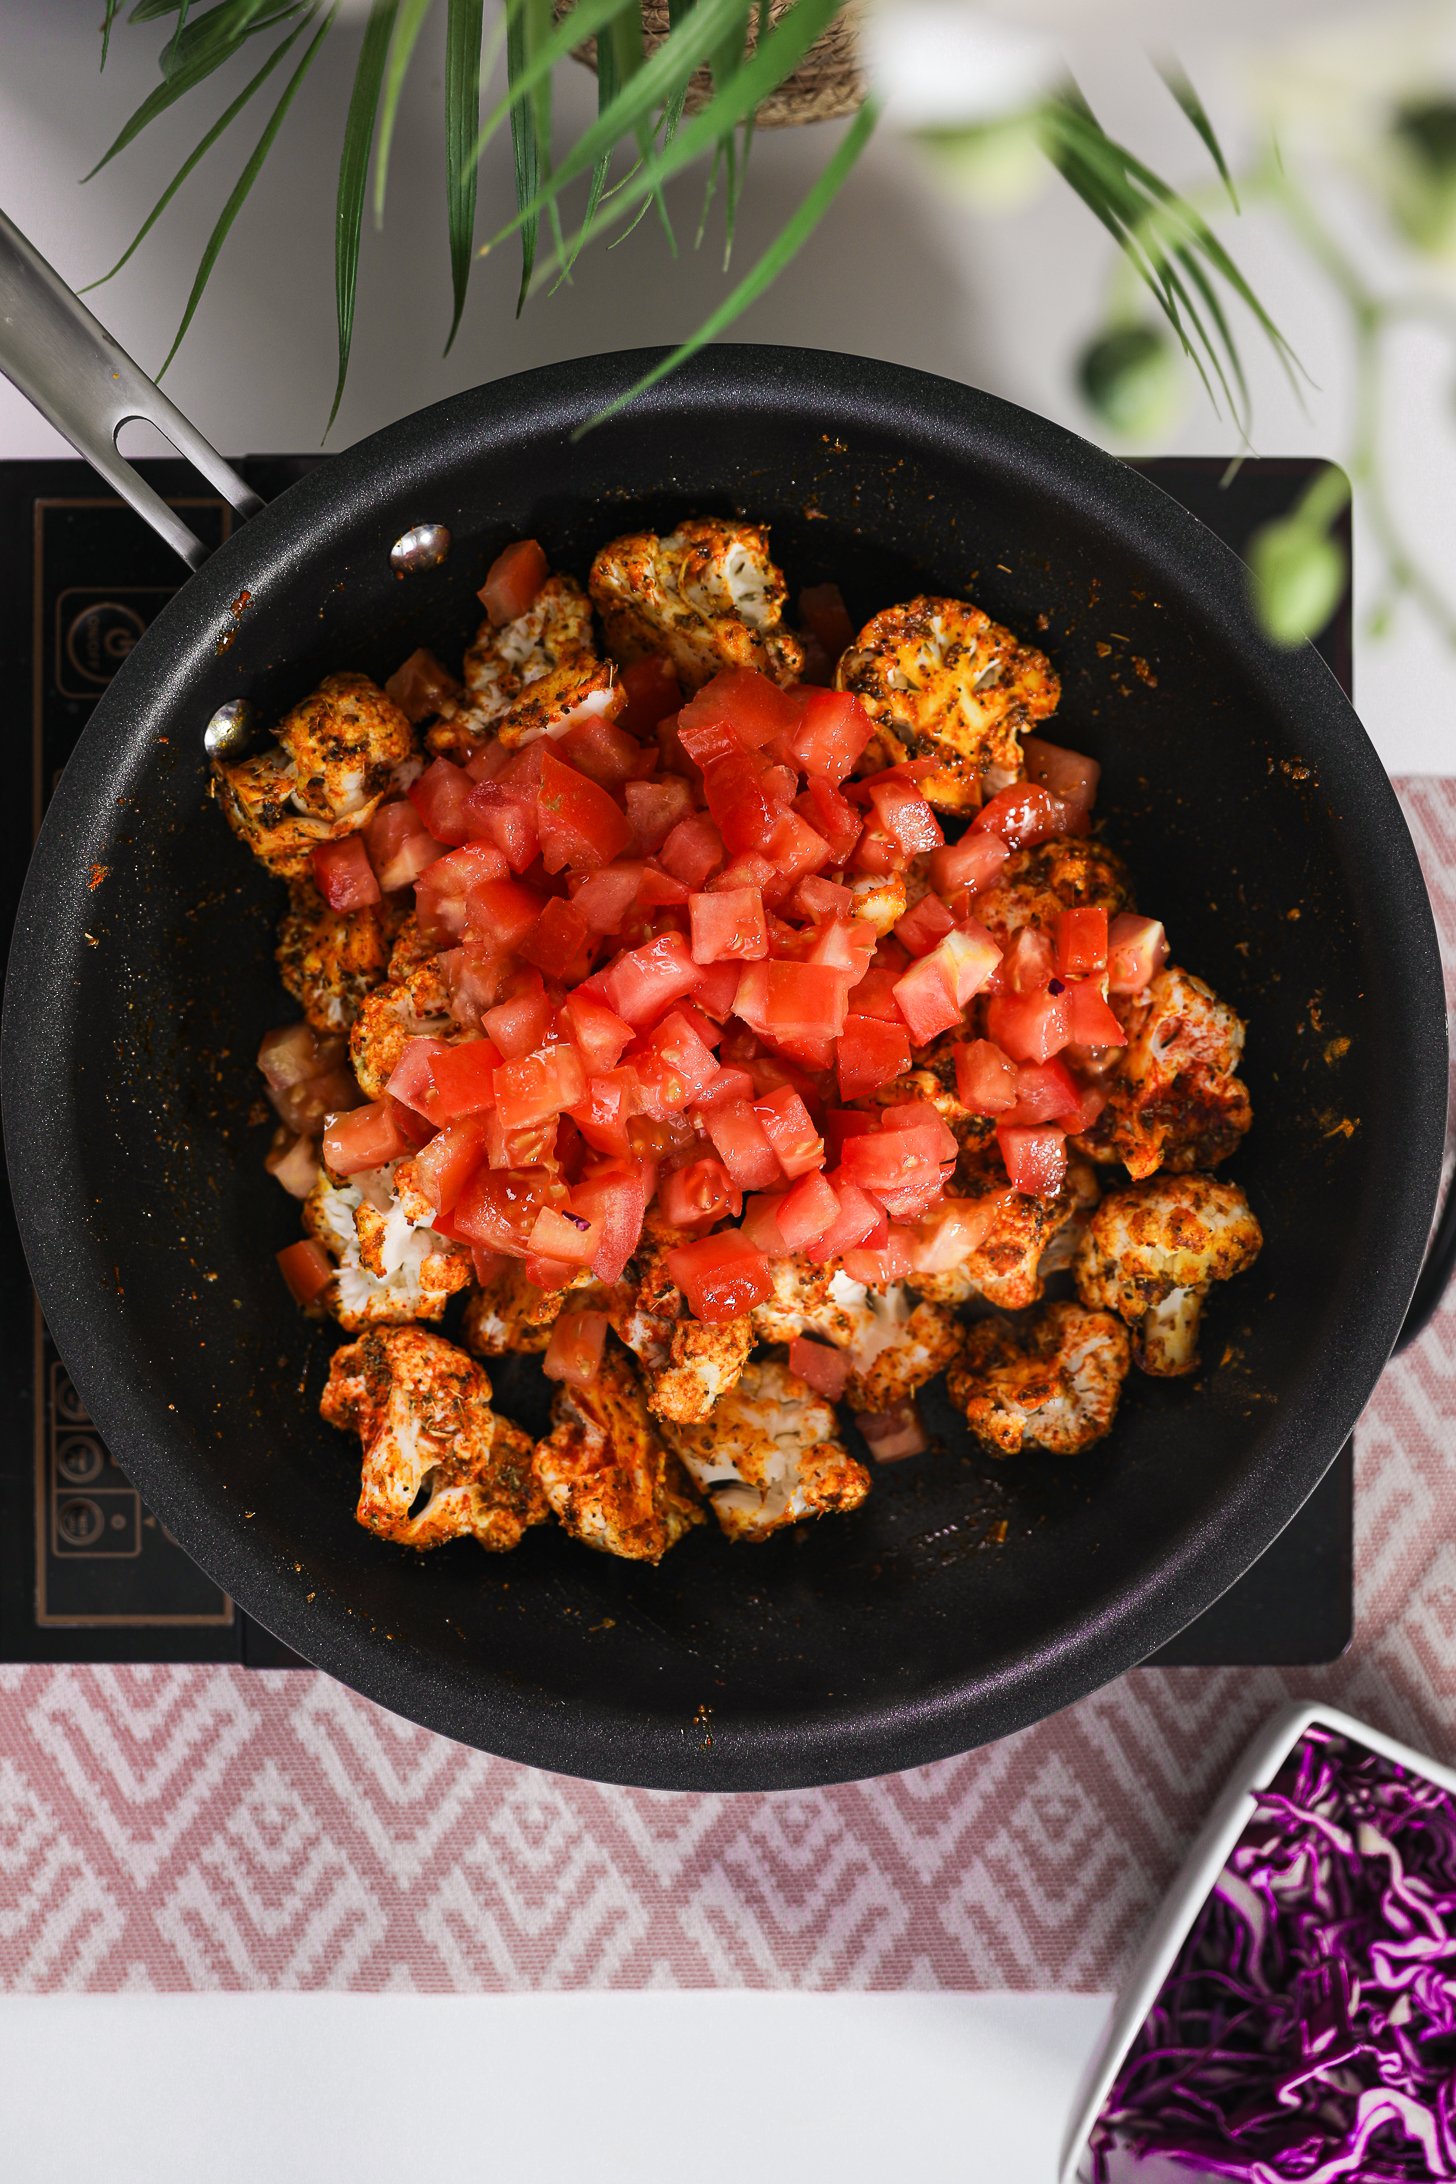 Pan of spice-coated cauliflower florets topped with chopped tomatoes on a mobile worktop.